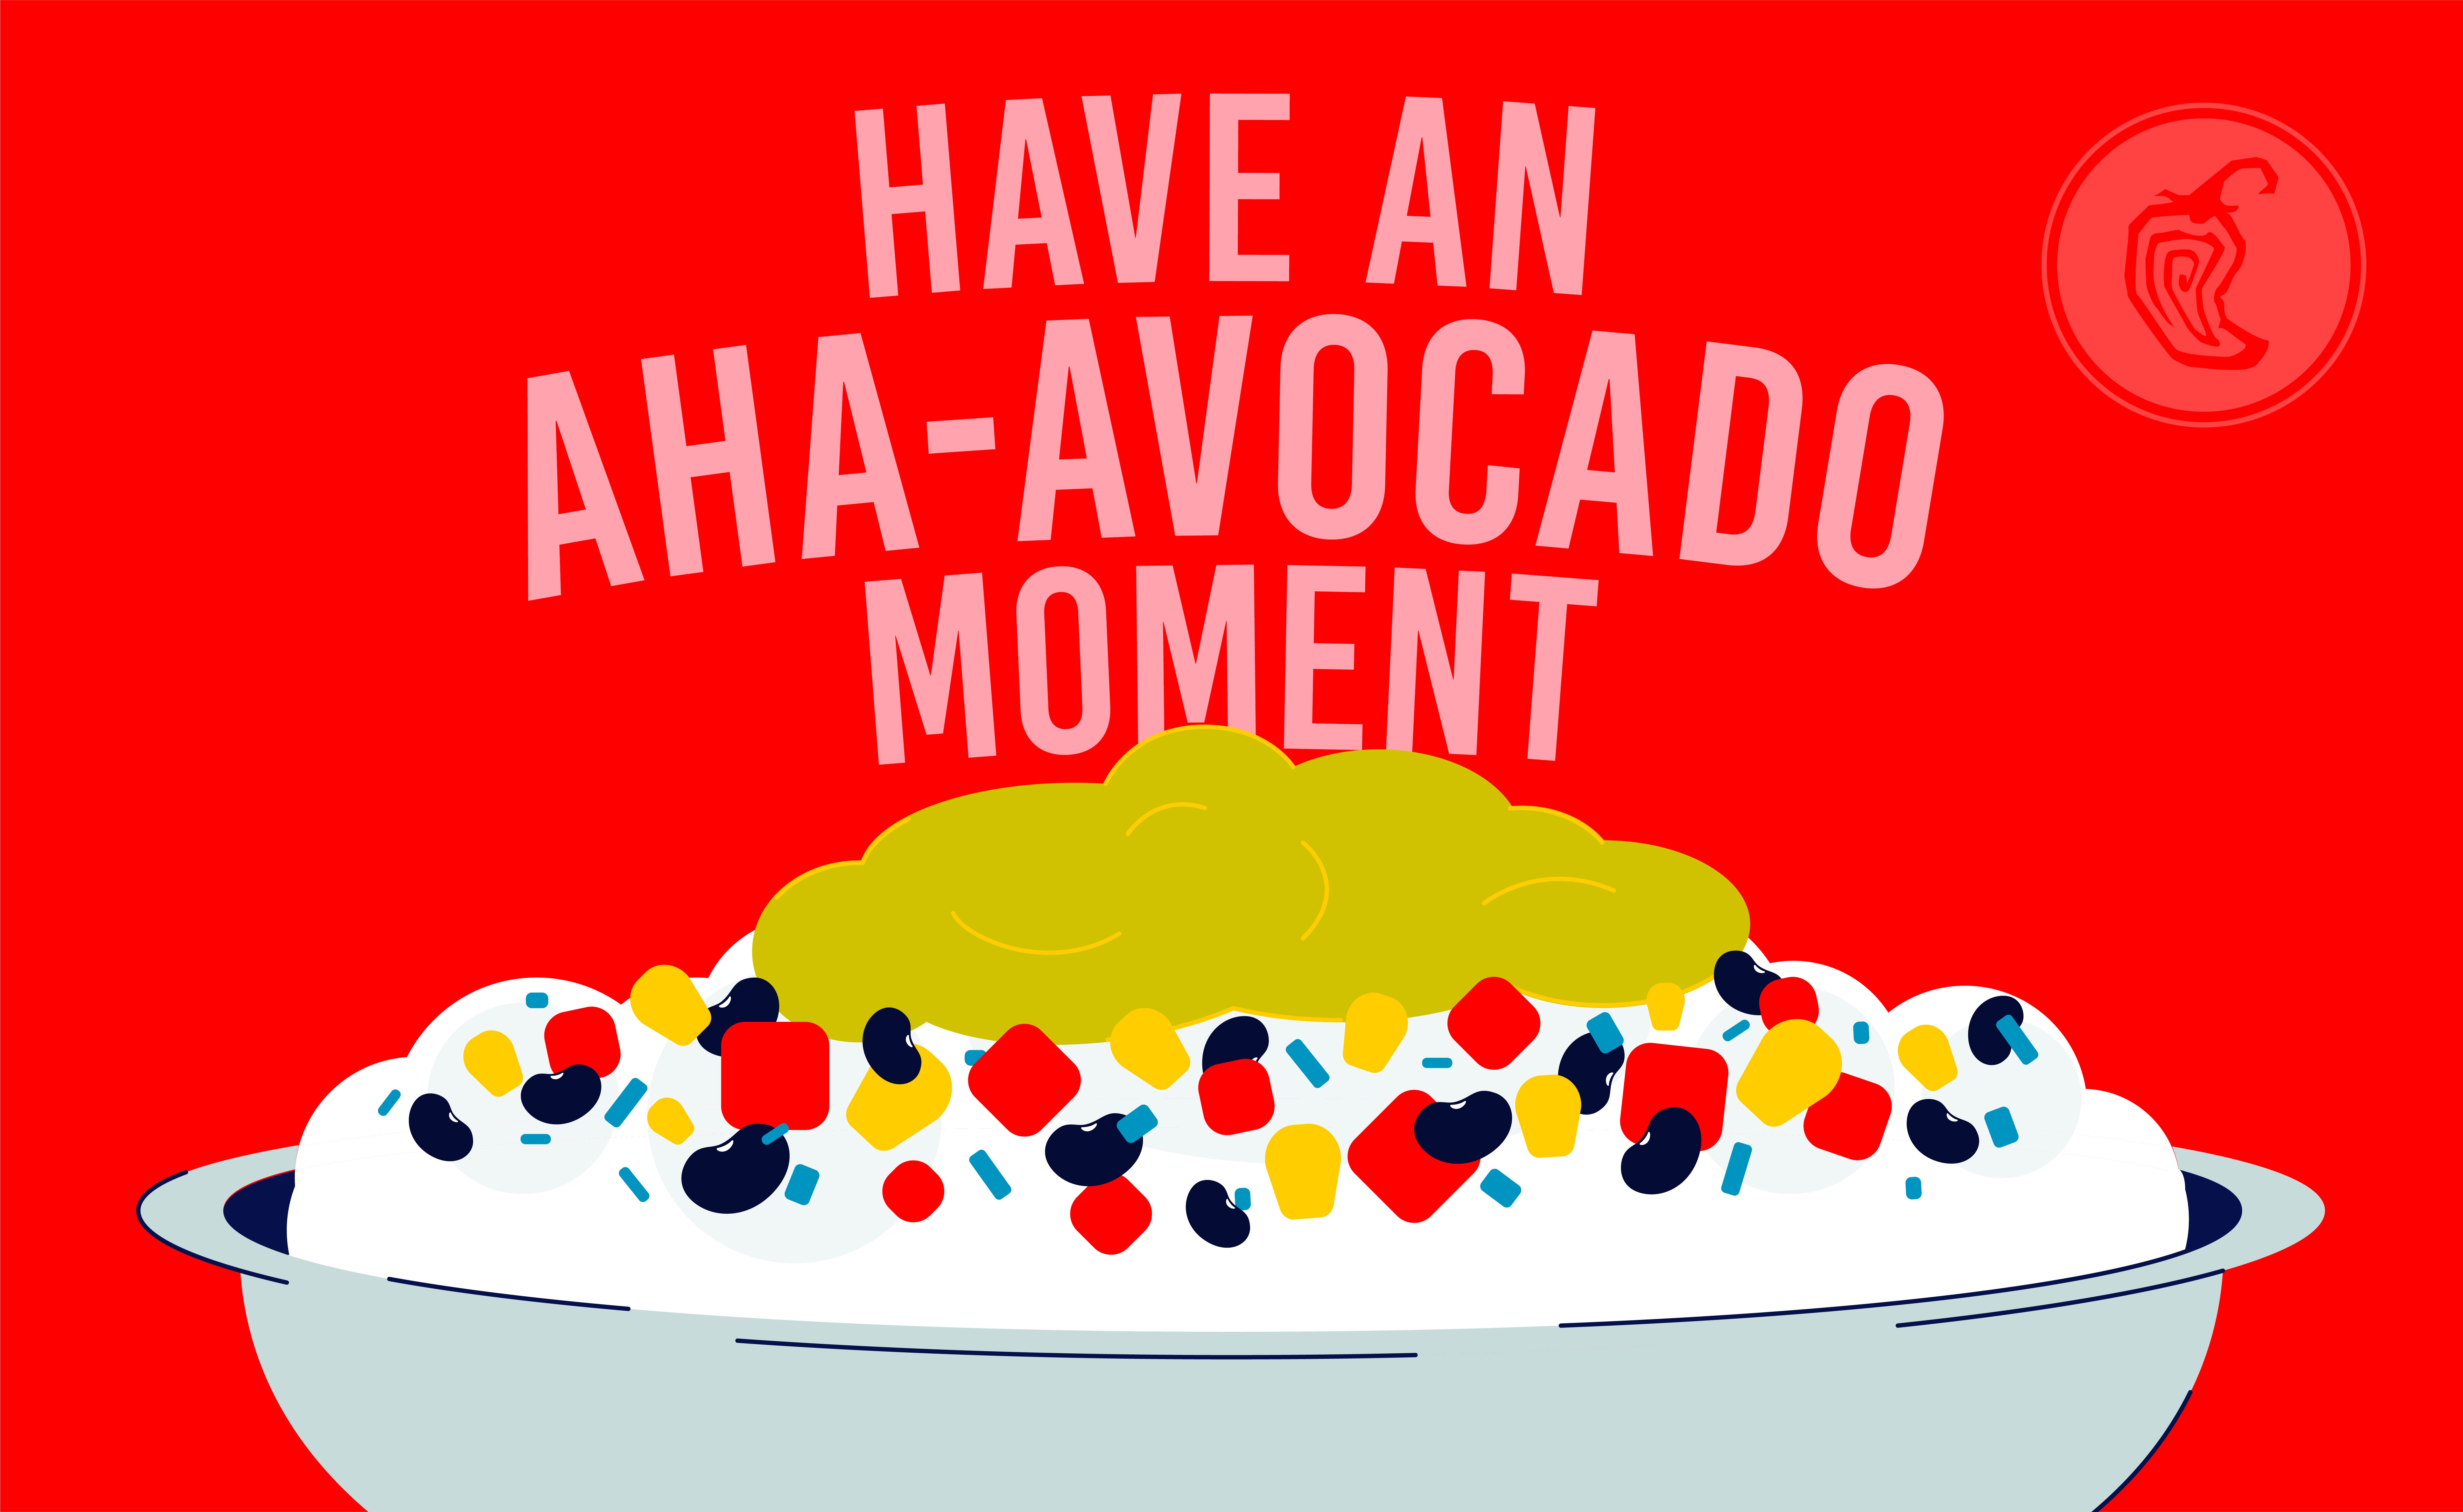 chipotle burrito bol with the 'have an aha-vacado moment' in online ads